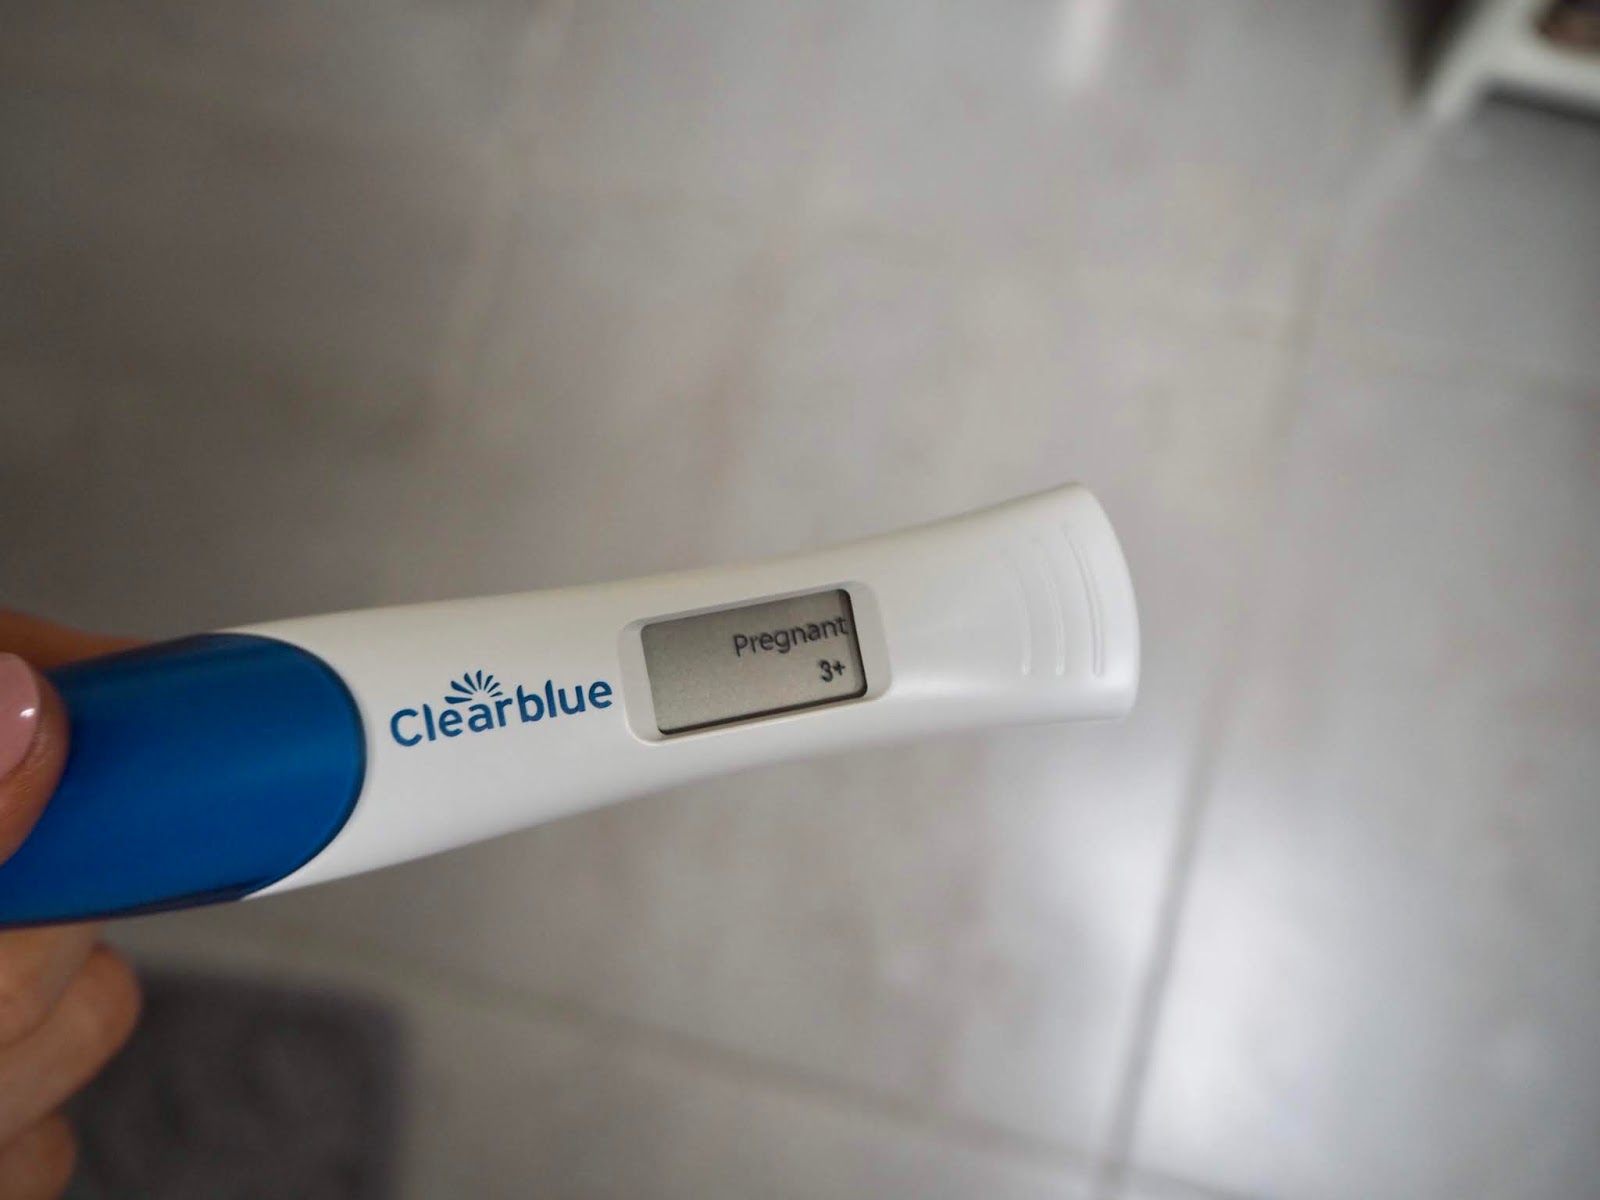 Implant Removal and a Positive Pregnancy Test